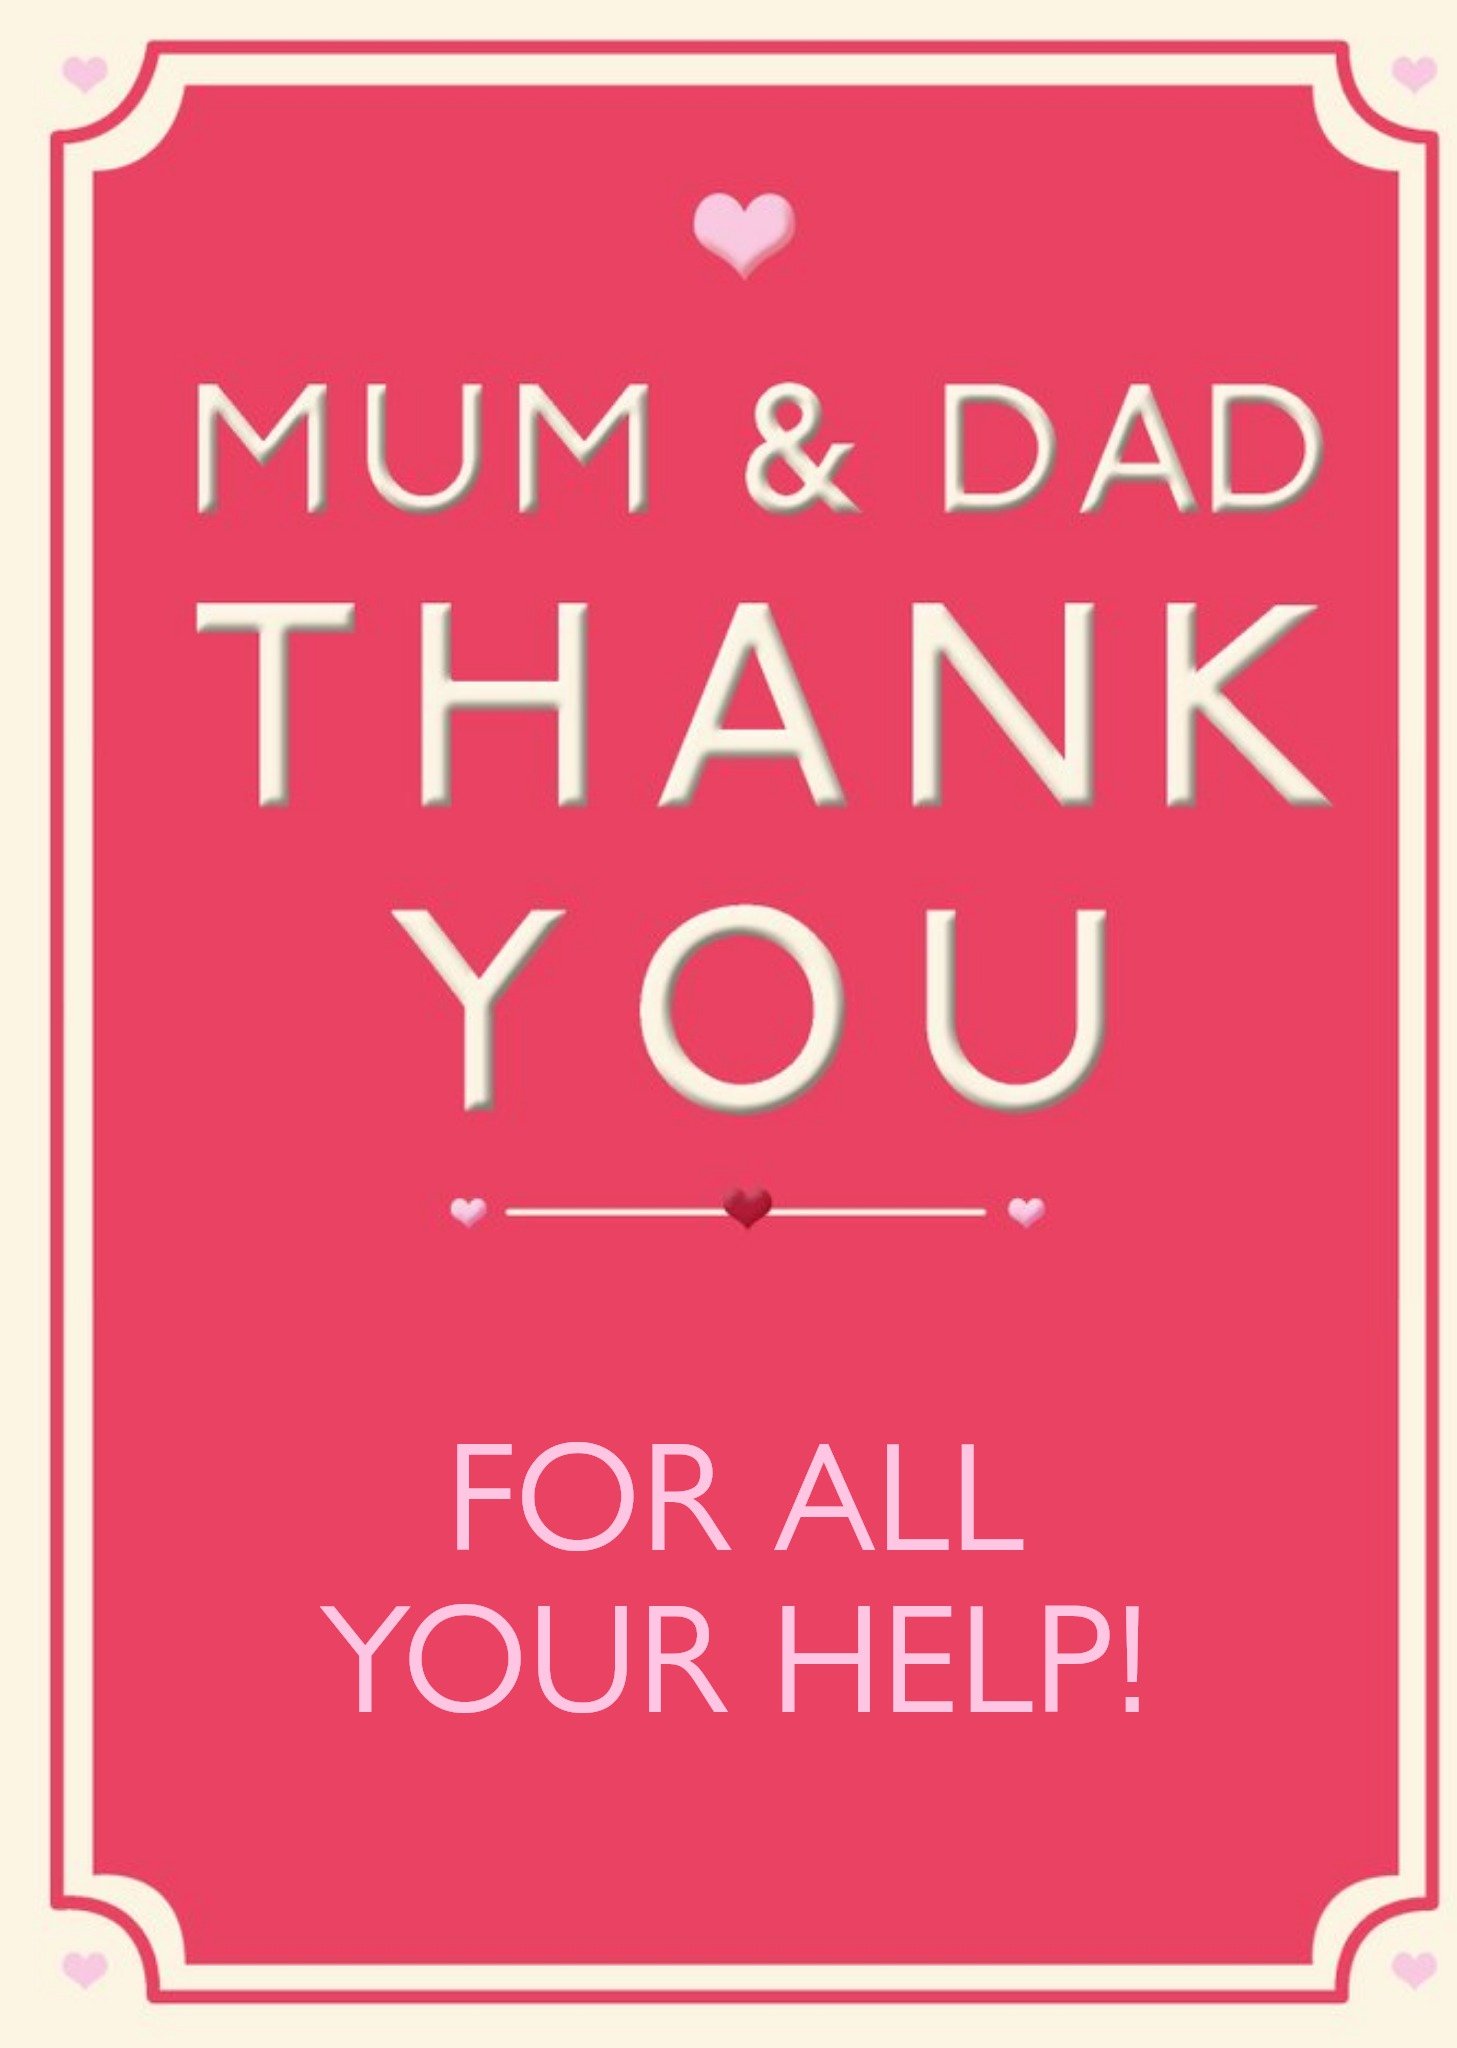 Moonpig Cream Typography With A Cream Border On A Pink Background Mum & Dad Thank You Card, Large